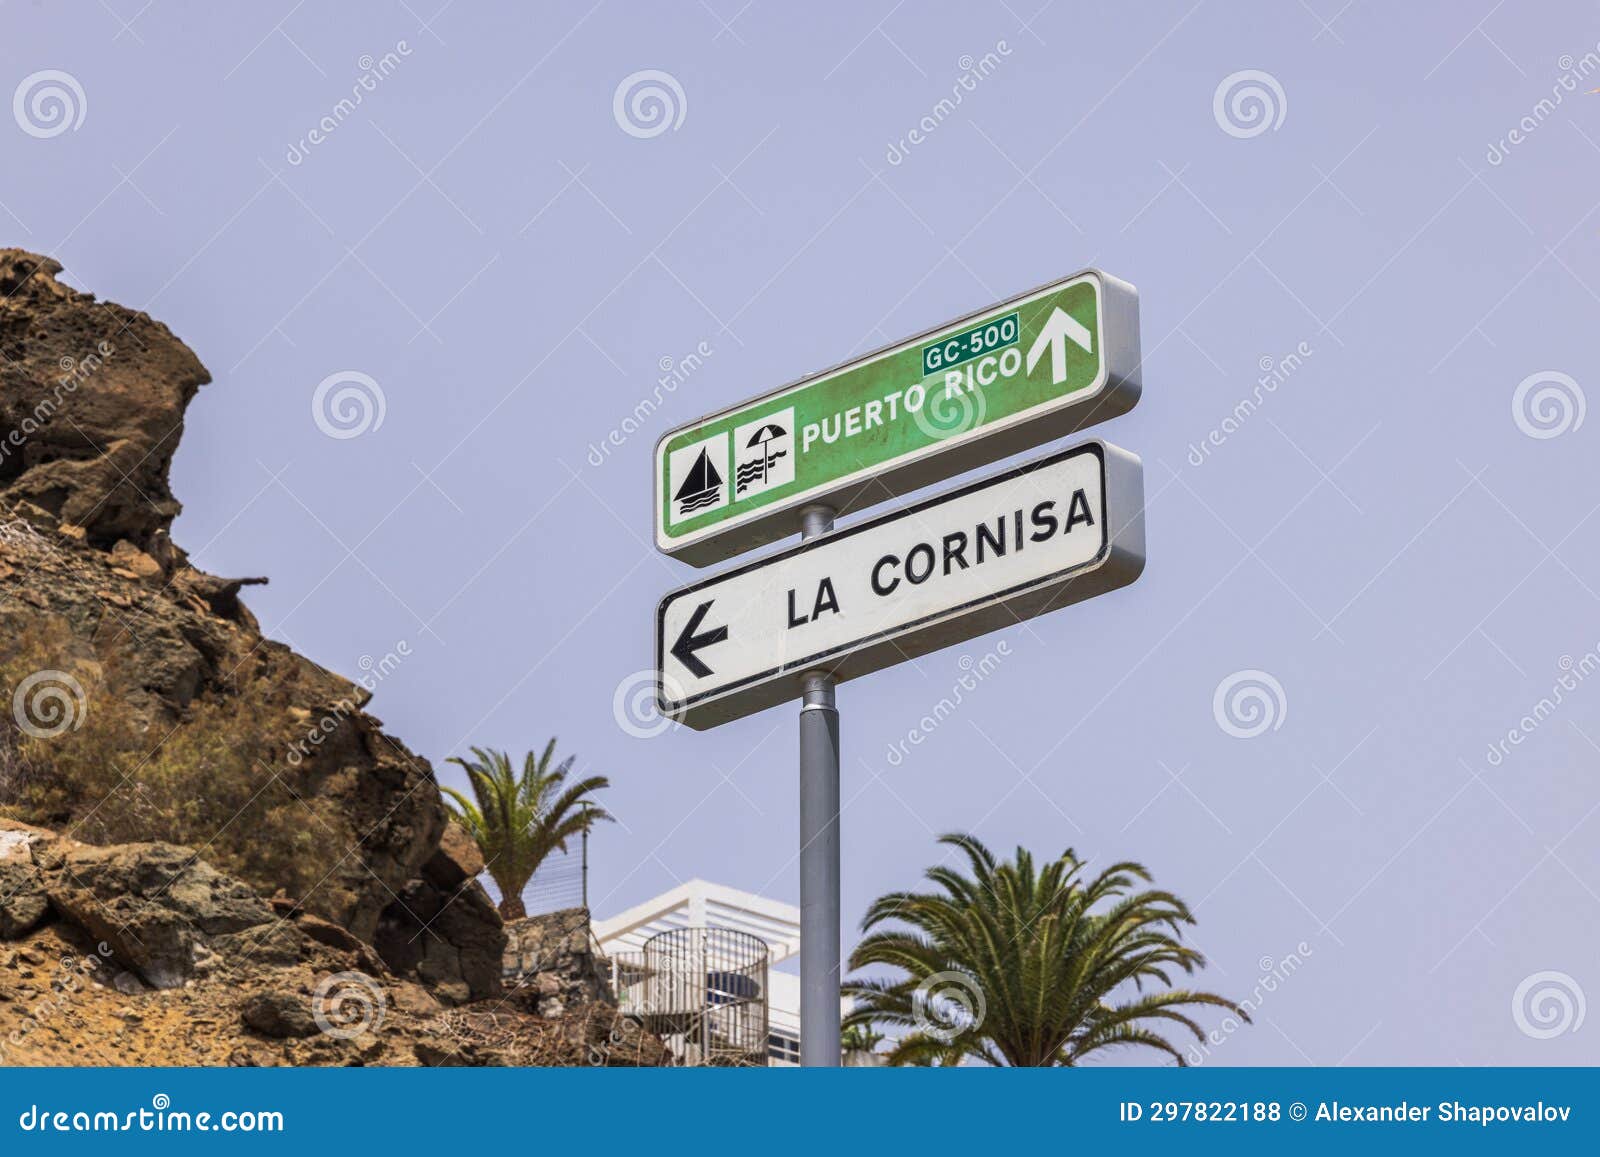 close-up of signs indicating direction to puerto rico beach and highway towards la cornisa on island of gran canaria.